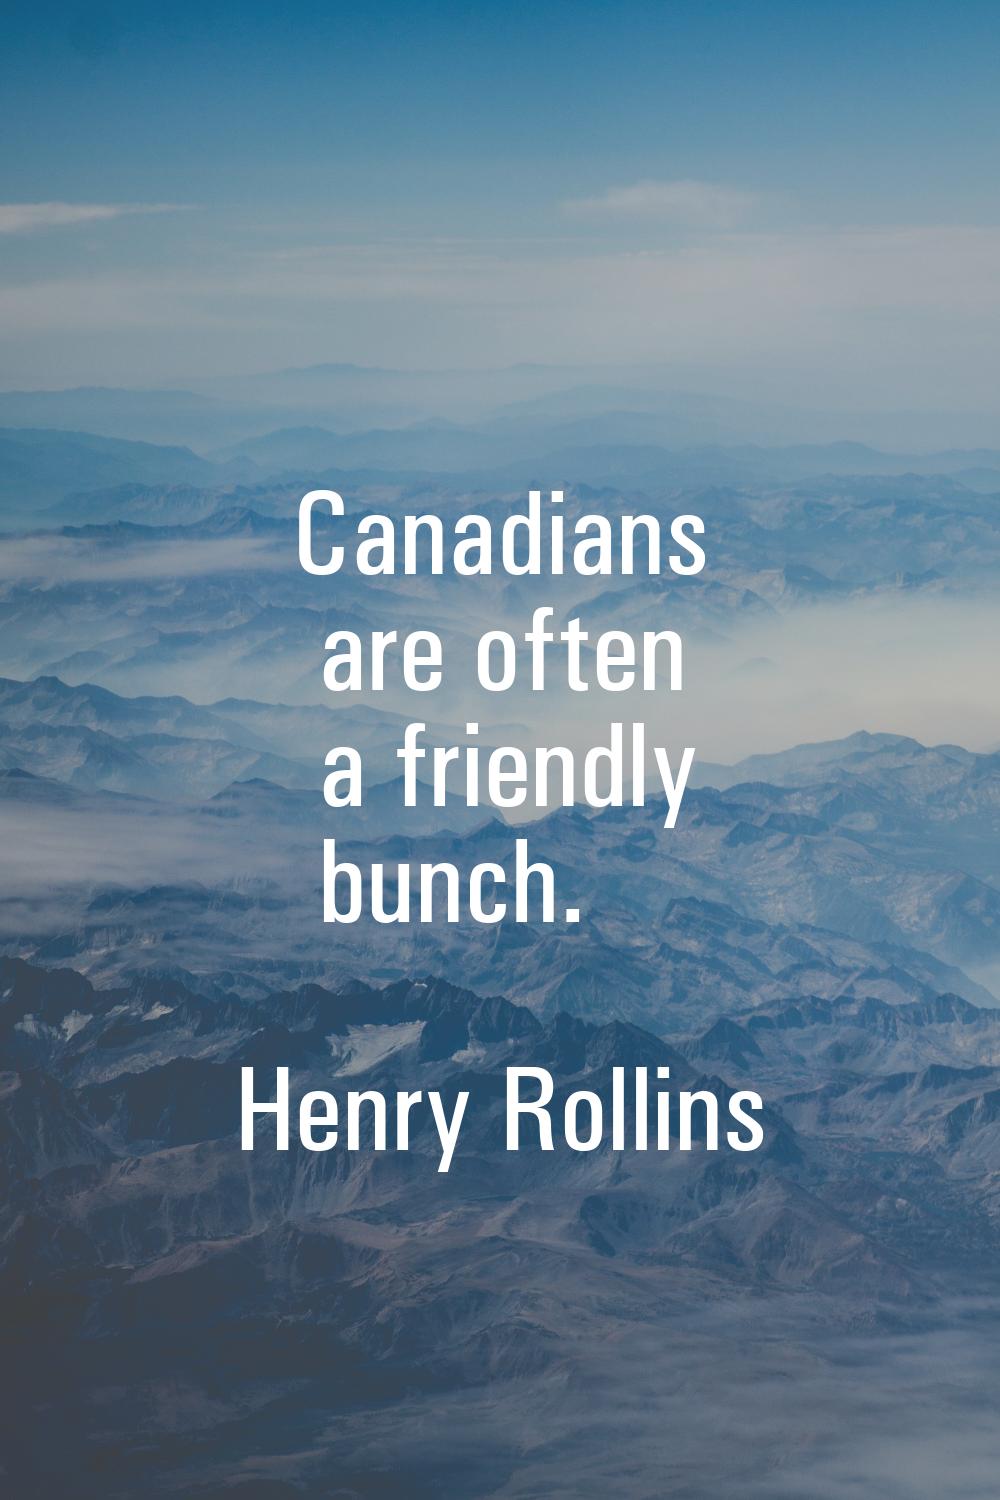 Canadians are often a friendly bunch.